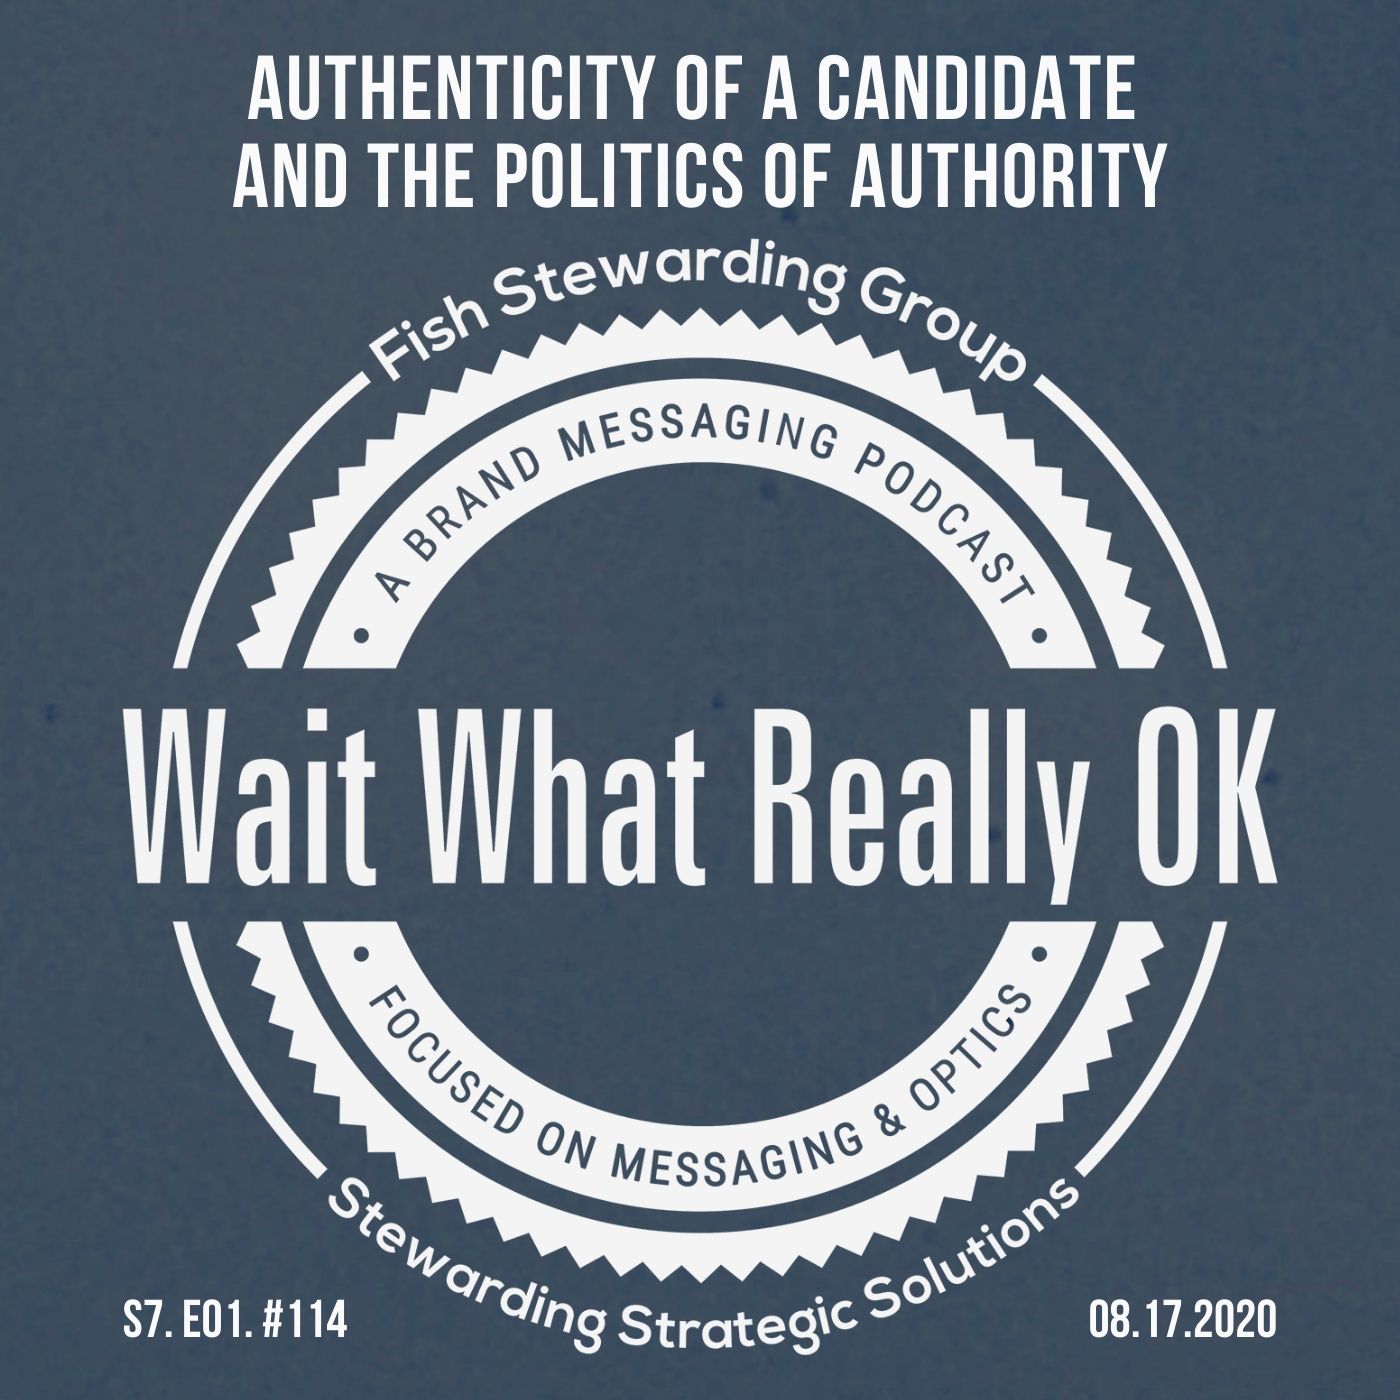 Authenticity of a candidate and the politics of authority.